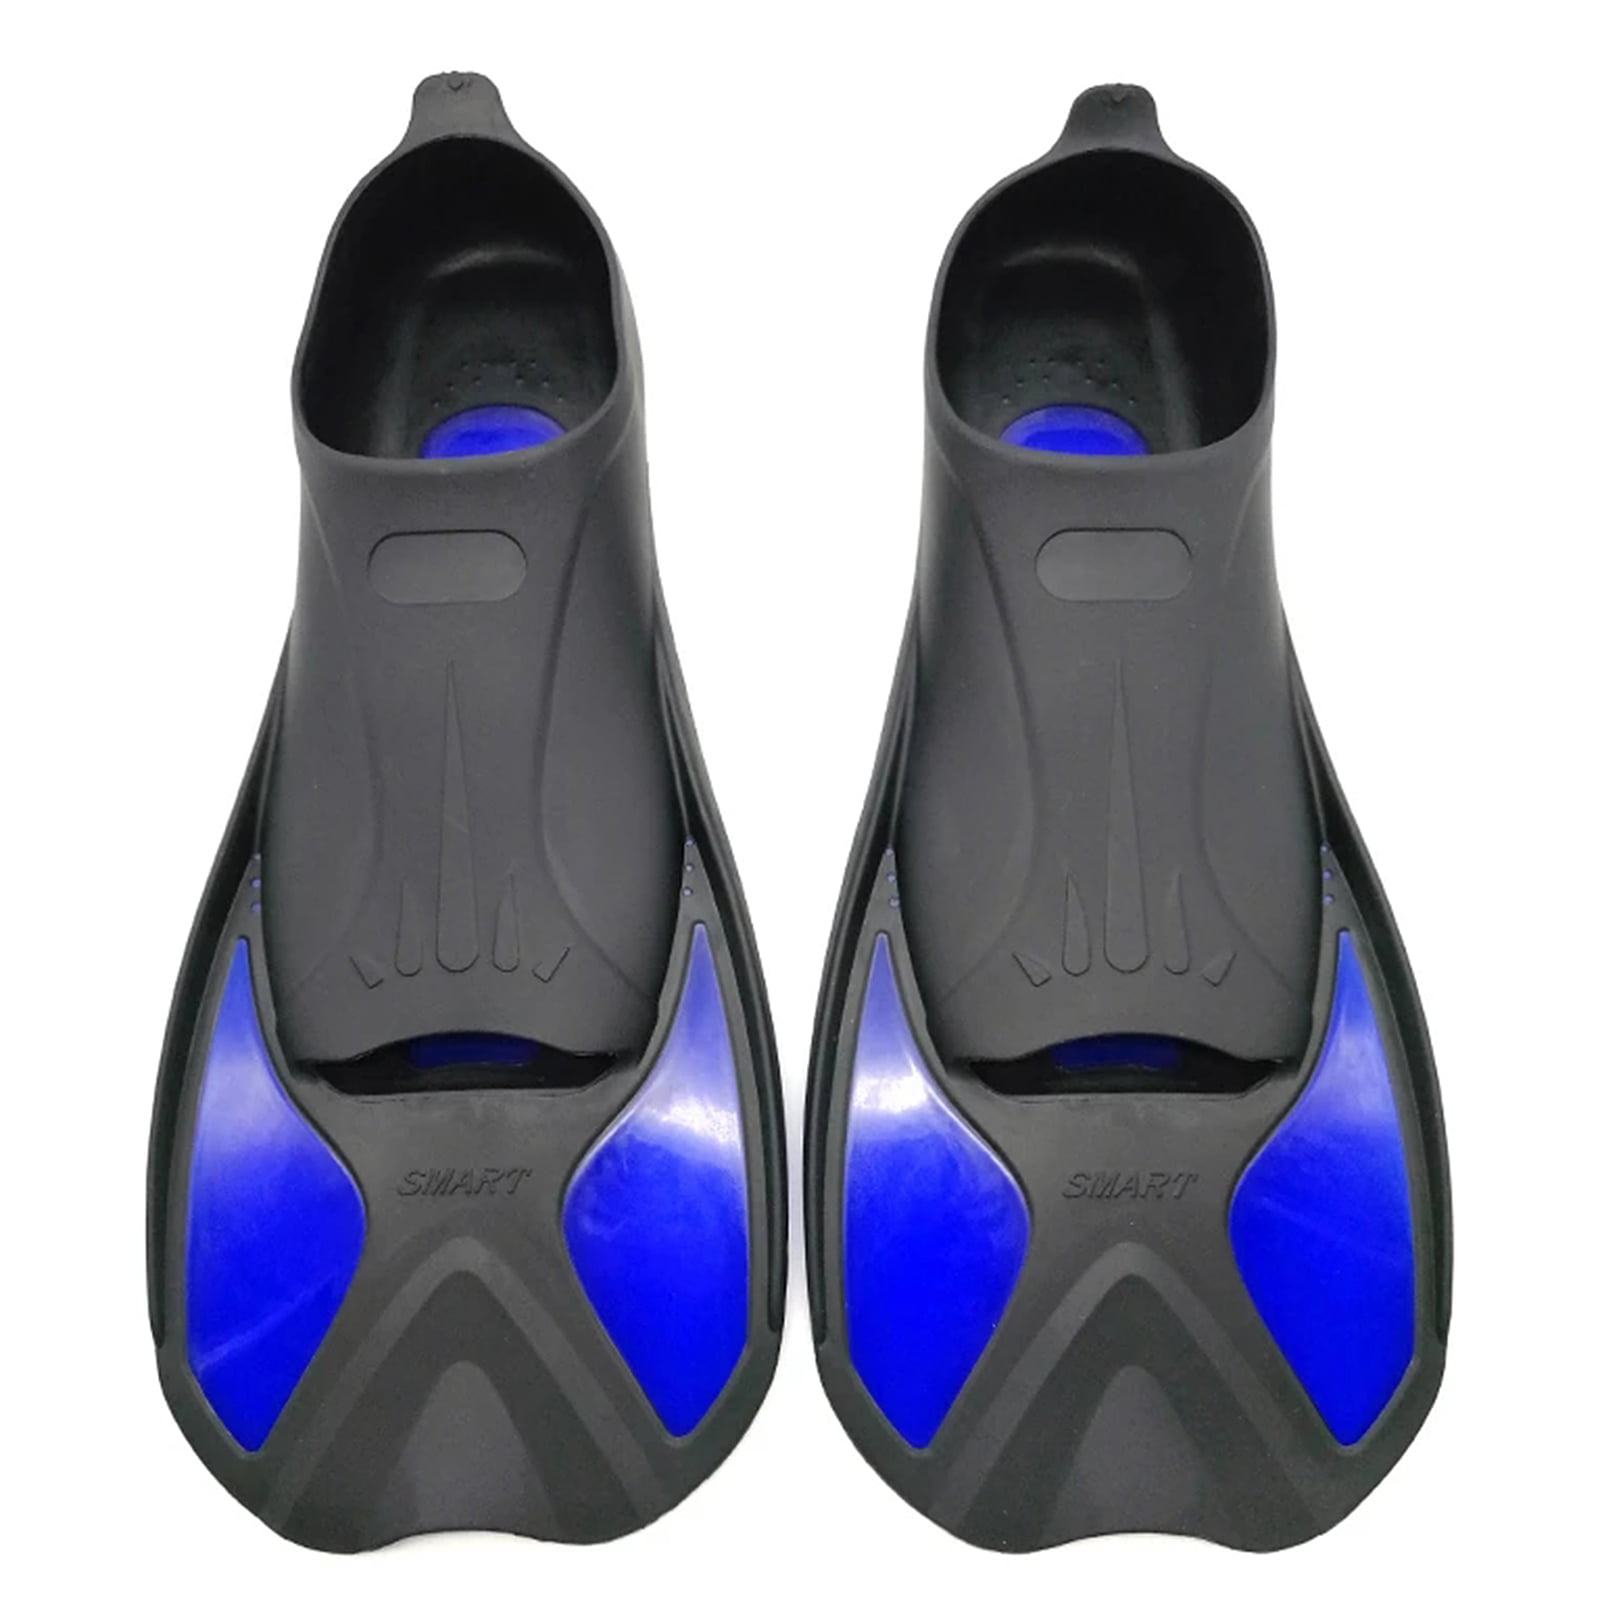 AMPHINS SWIM FINS FEET PLAY SHOES GREAT FOR BEACH POOL WATER COSPLAY SMALL BLUE 